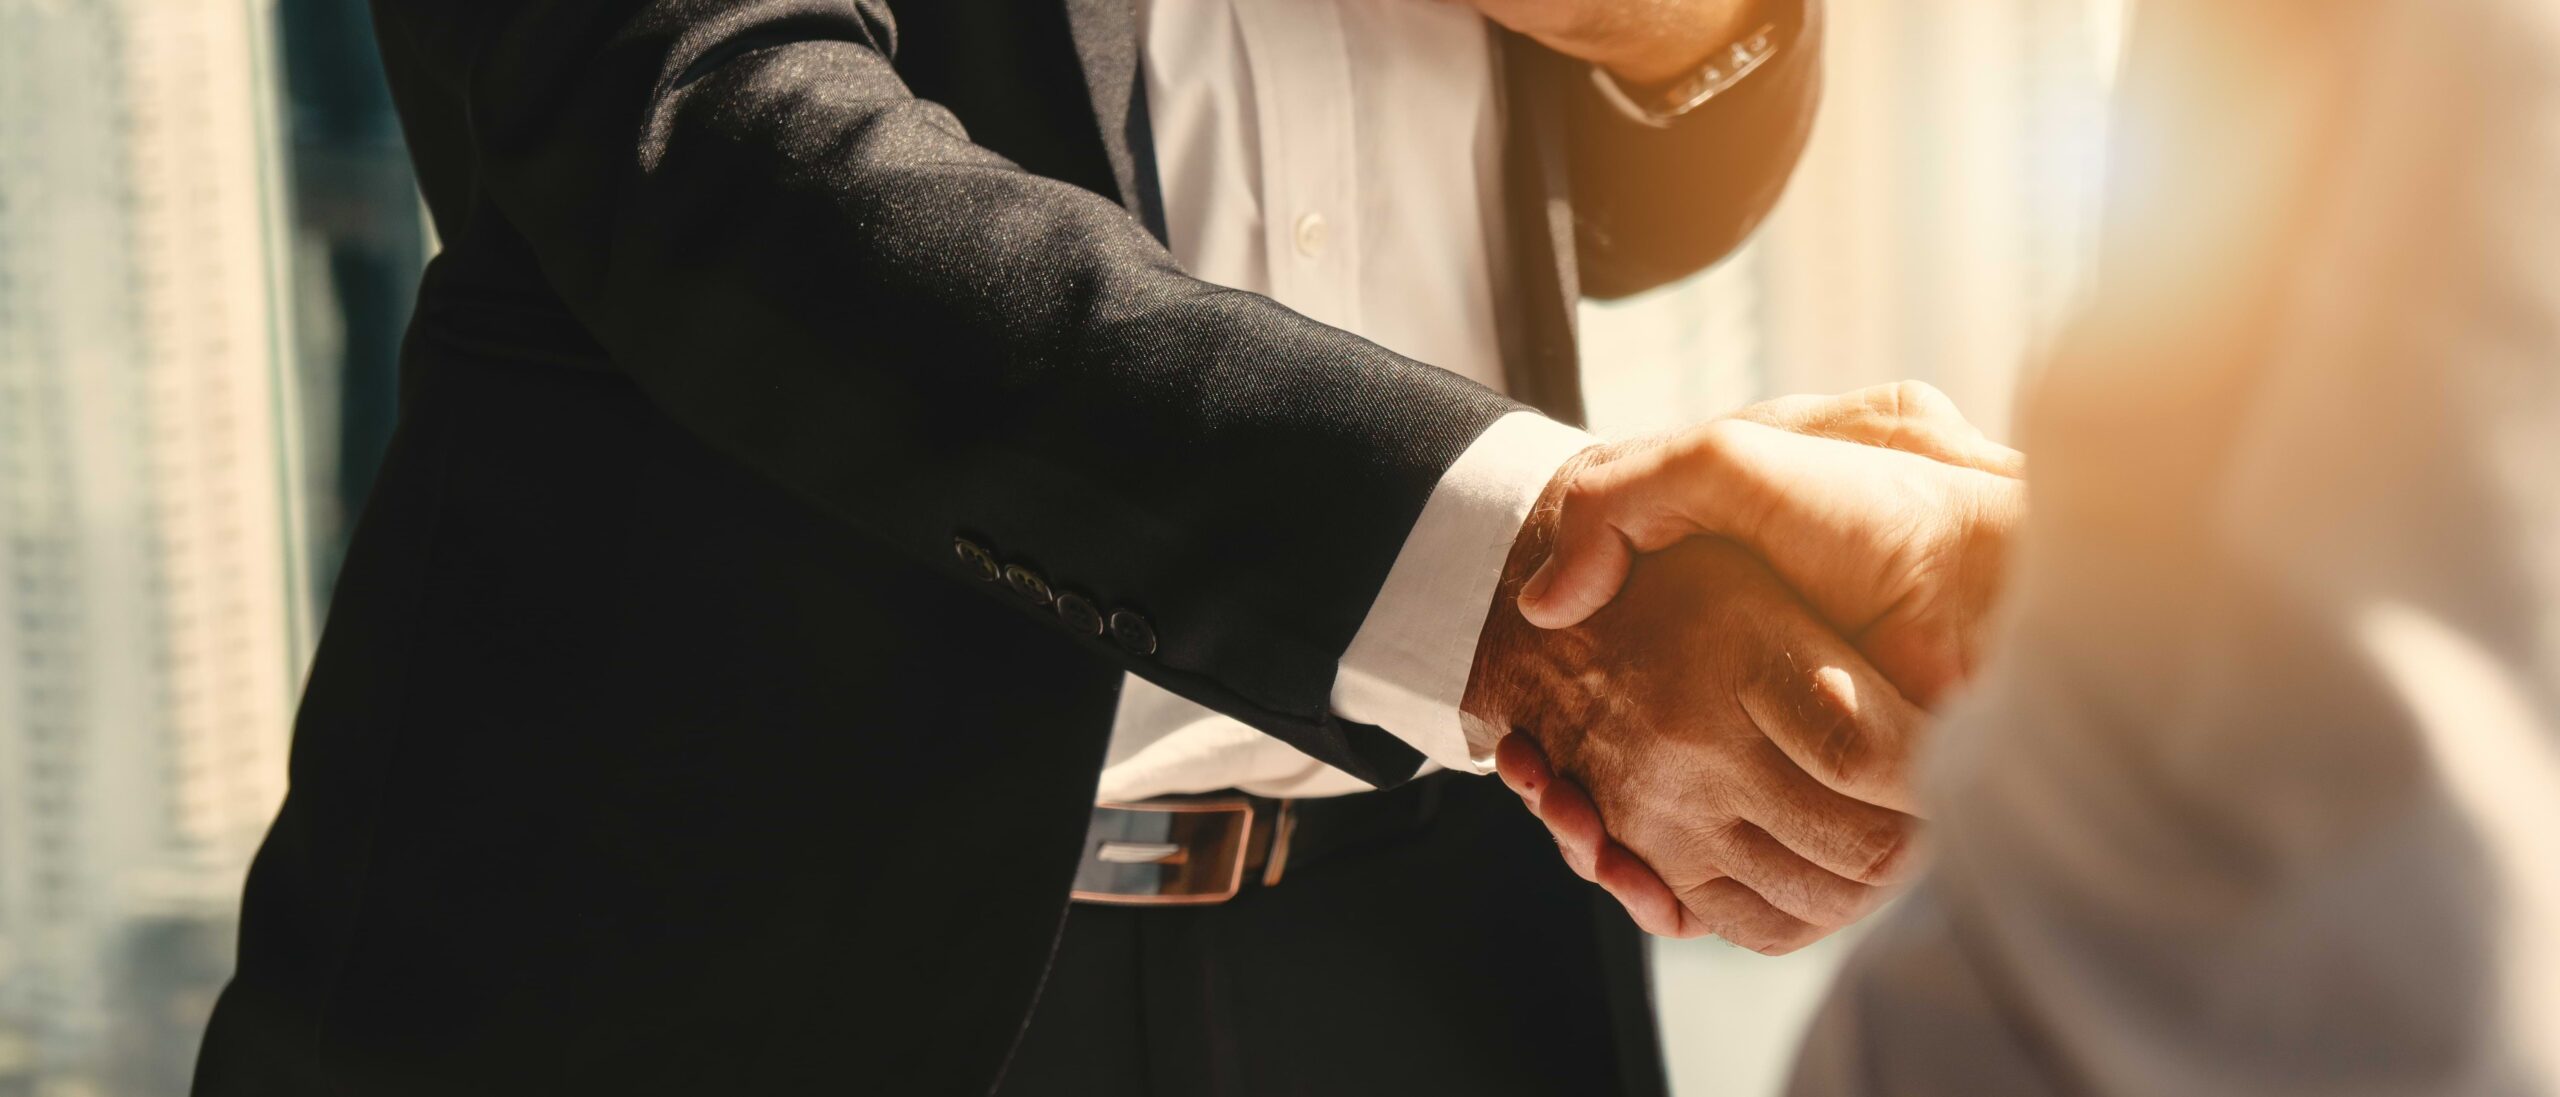 How to Buy Out a Business Partner